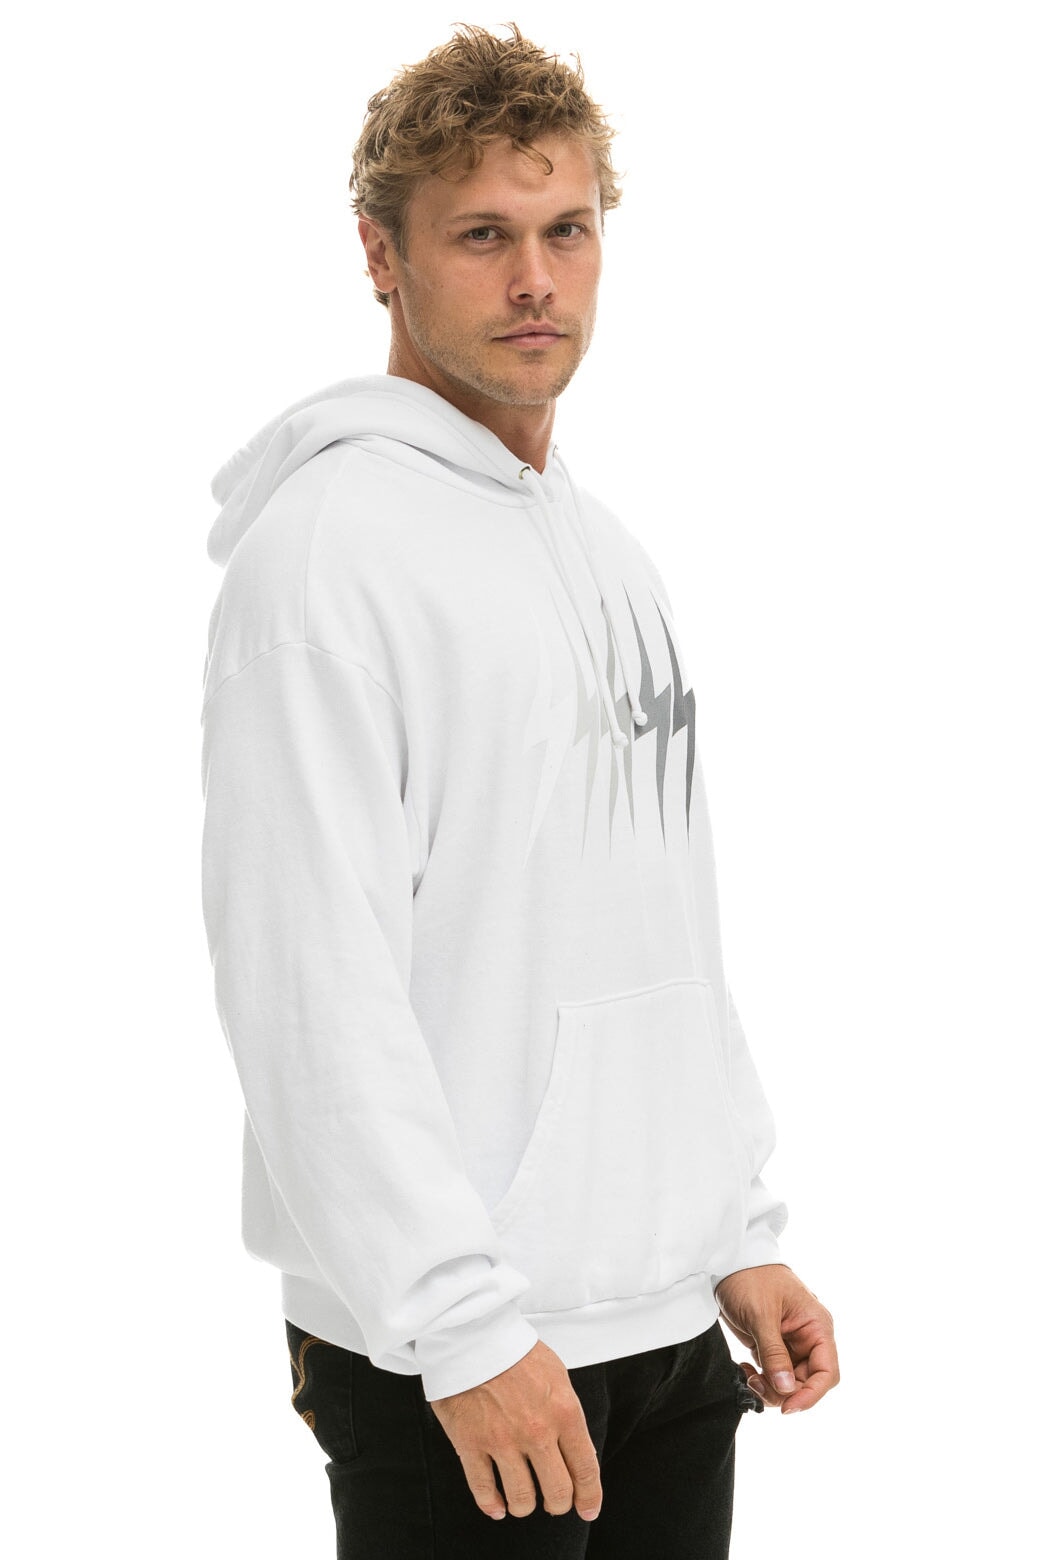 BOLT GRADIENT RELAXED PULLOVER HOODIE - WHITE // GREY Hoodie Aviator Nation 